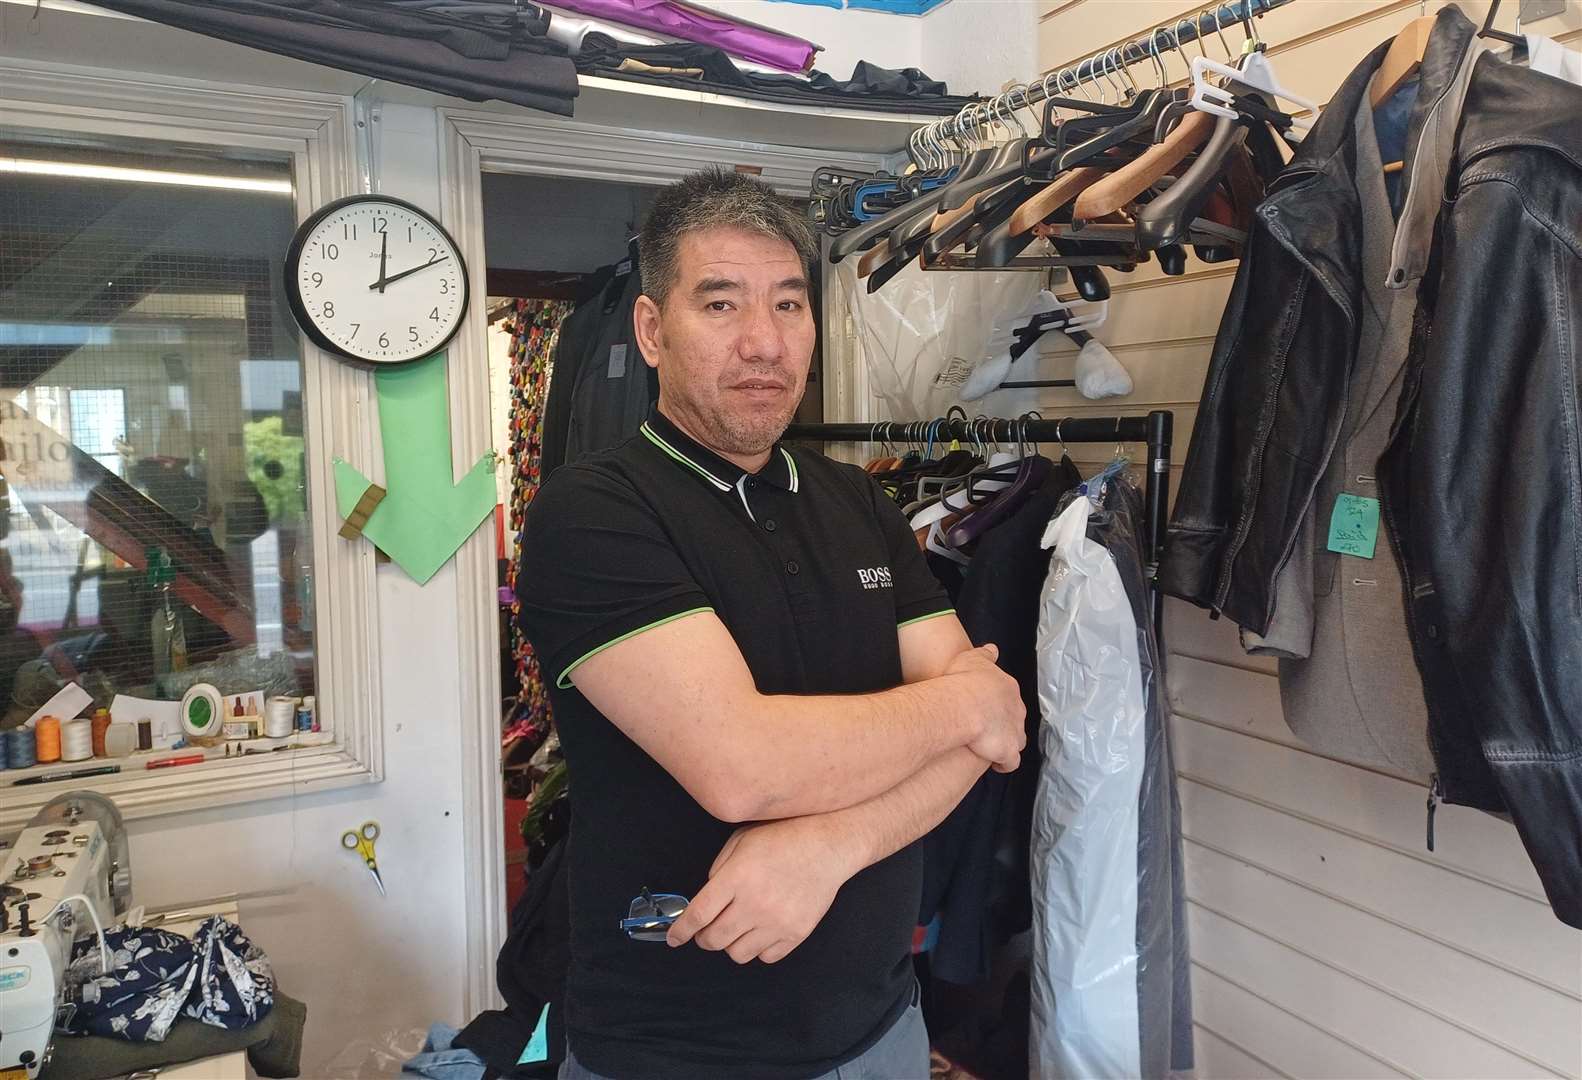 Zaman Qorbani, owner of Maidstone Tailoring, feels sorry for those who live along the road